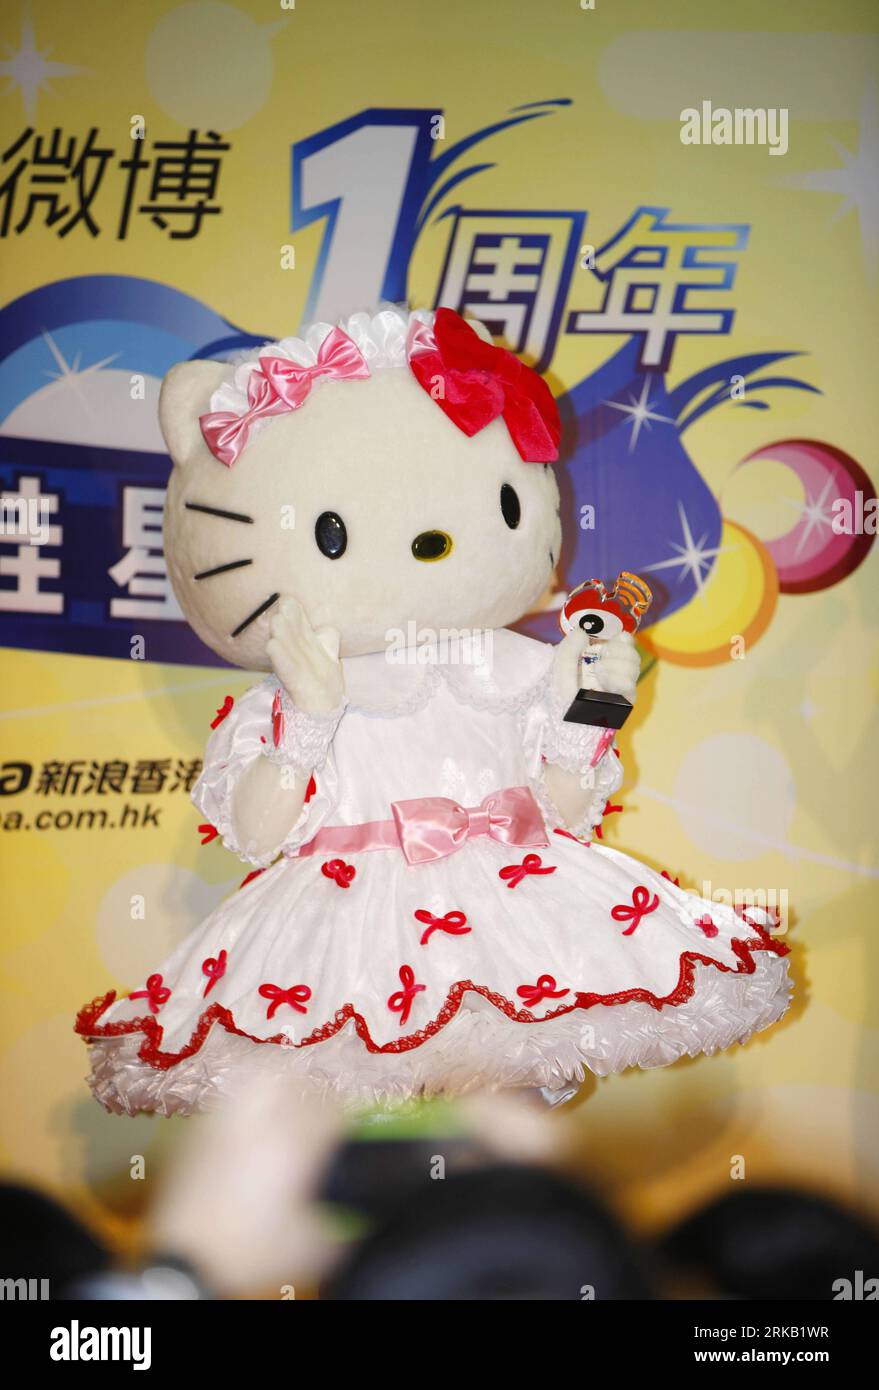 Bildnummer: 54445114  Datum: 20.09.2010  Copyright: imago/Xinhua (100920) -- HONG KONG, Sept. 20, 2010 (Xinhua) -- Hello Kitty takes her trophy for winning the Sina Weibo Star-Users Awards during Sina Weibo Anniversary Celebration in Hong Kong, south China, Sept. 20, 2010. Sina Weibo Monday presented the Sina Weibo Star-Users Awards to celebrities and organizations who made the best use of Sina Weibo to exert a positive influence on the network and the society at large. (Xinhua/Duan Zhuoli) CHINA-HONG KONG-SINA WEIBO-ANNIVERSARY (CN) PUBLICATIONxNOTxINxCHN People Entertainment Pressetermin kbd Stock Photo